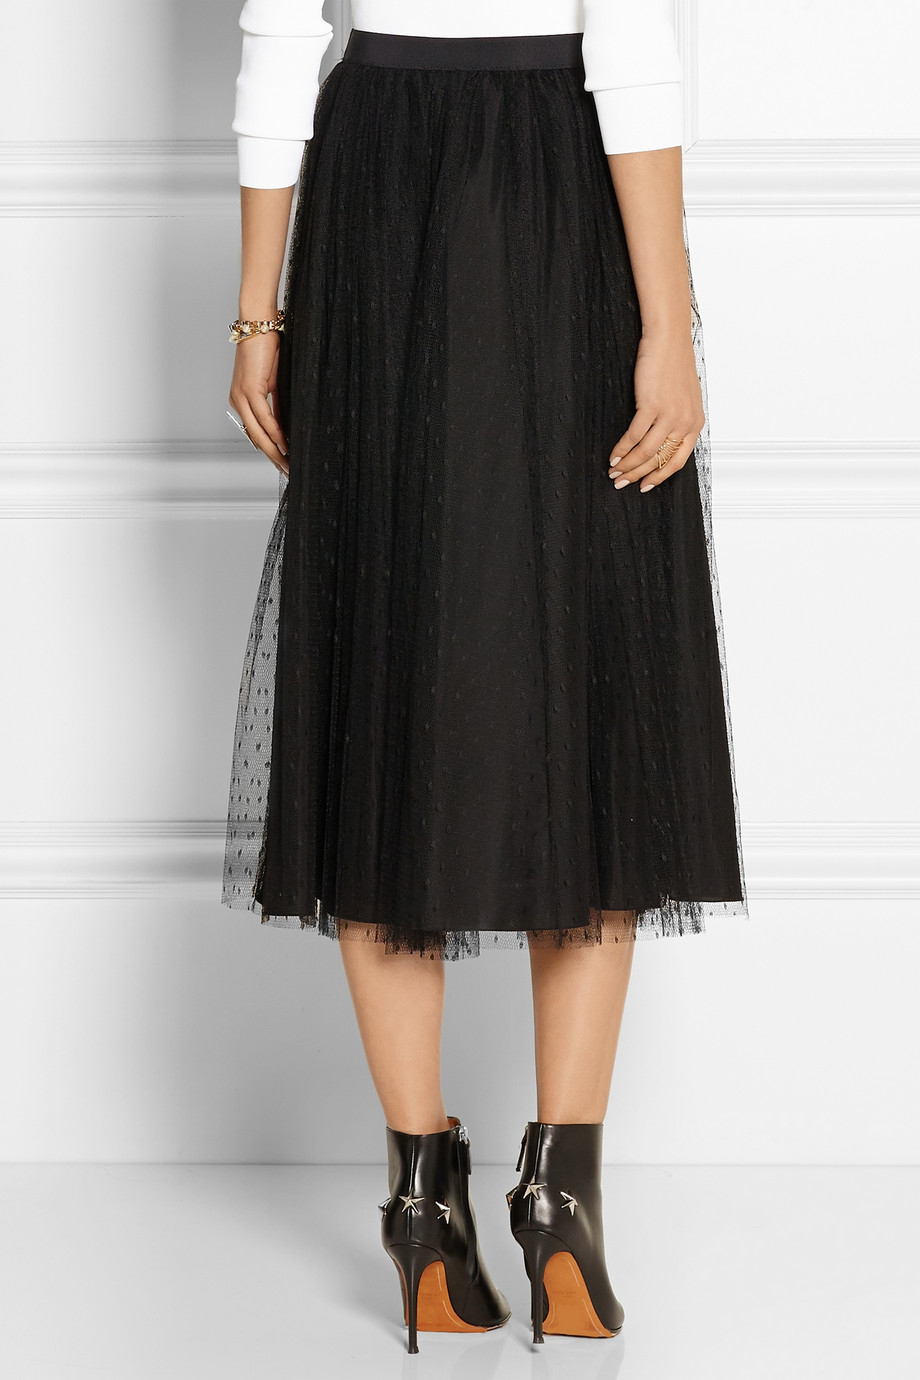 RED Valentino Point D'Esprit Tulle Midi Skirt in Black - Lyst